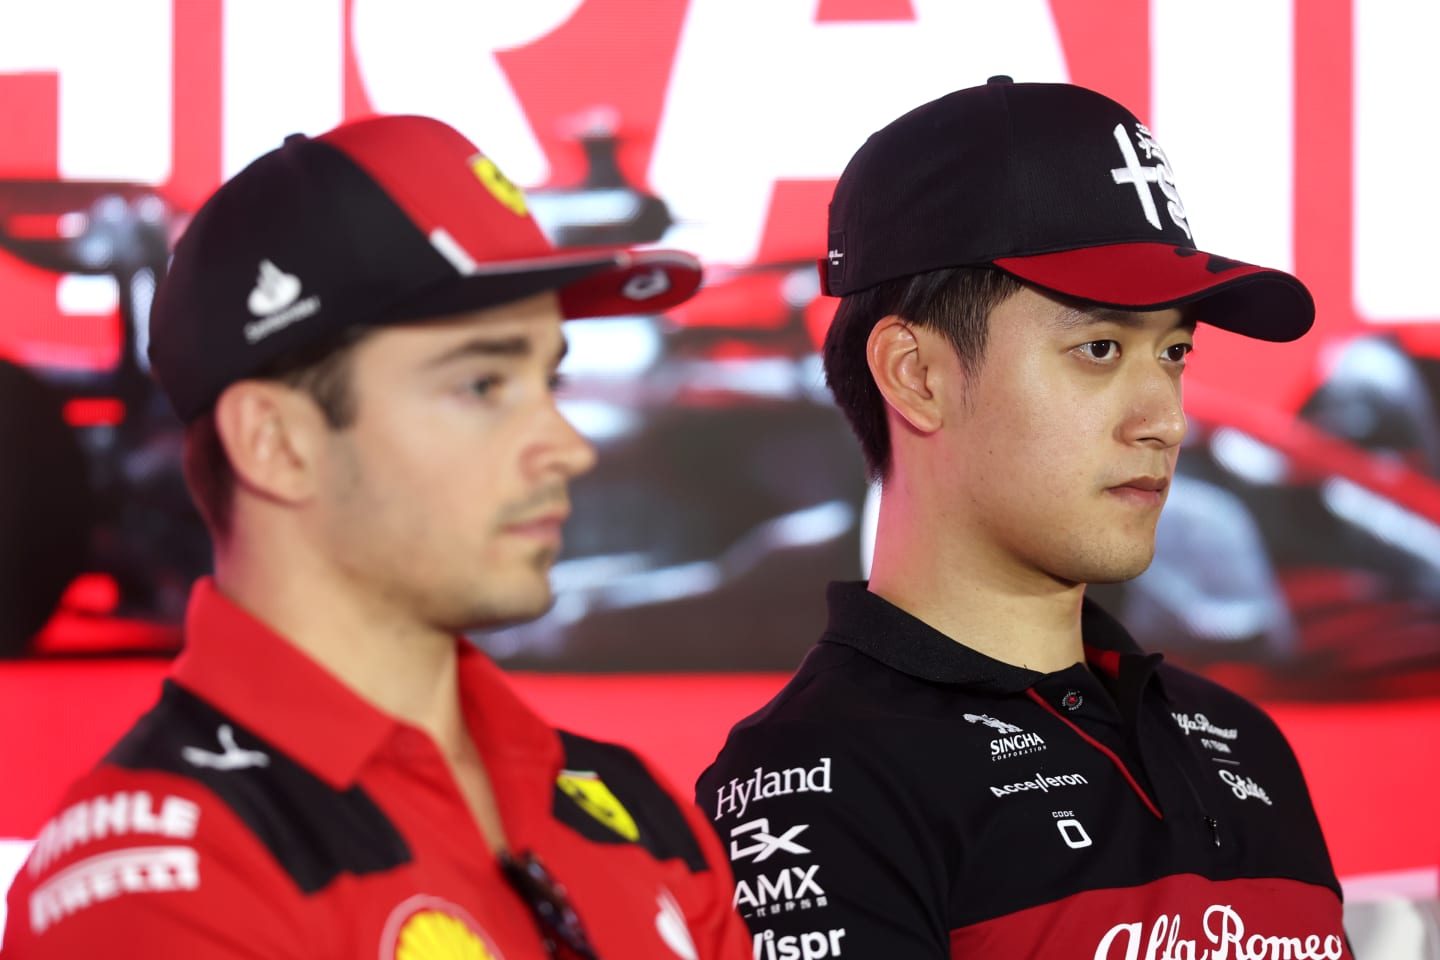 BAHRAIN, BAHRAIN - MARCH 02: Zhou Guanyu of China and Alfa Romeo F1 looks on in the Drivers Press Conference during previews ahead of the F1 Grand Prix of Bahrain at Bahrain International Circuit on March 02, 2023 in Bahrain, Bahrain. (Photo by Lars Baron/Getty Images)